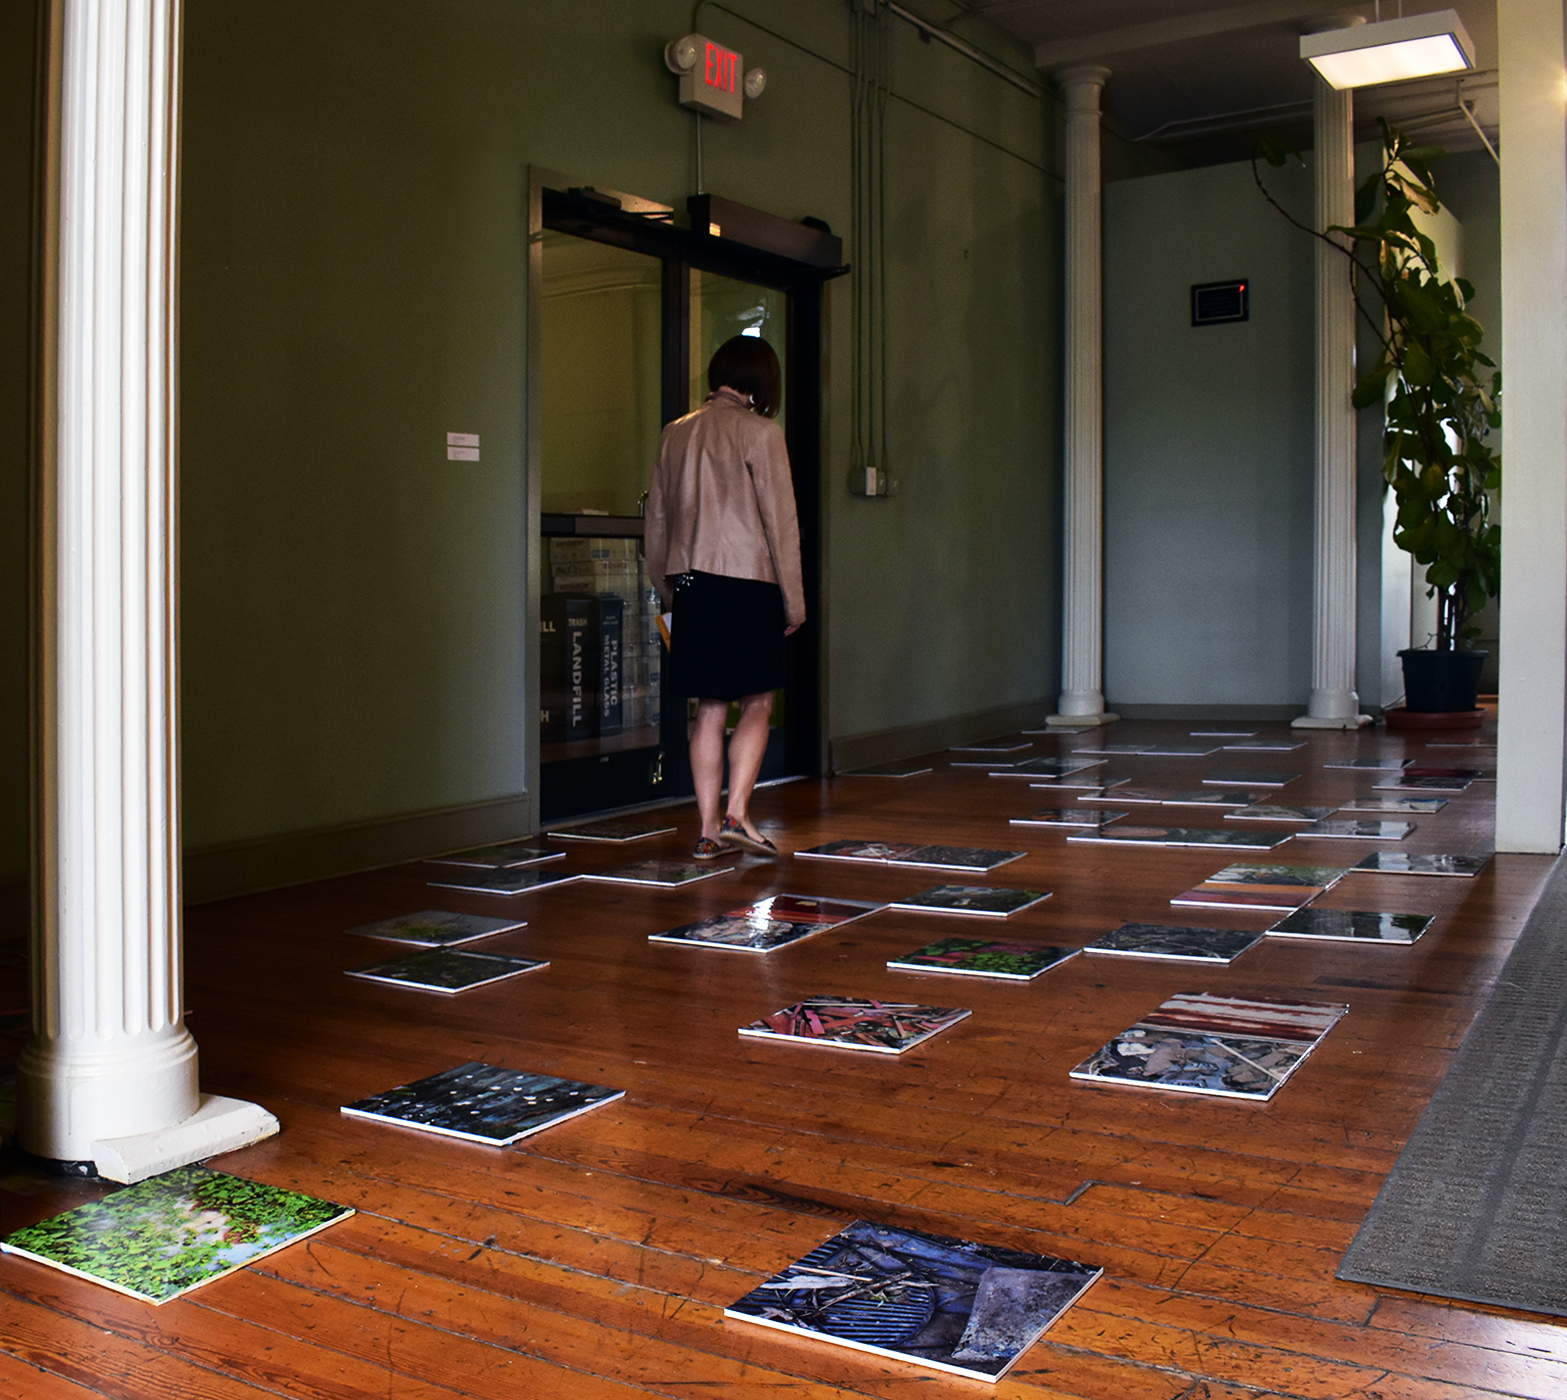 Someone walks among the tiles of Groundscapes Displaced, showing how the piece invites interaction and draws the eye